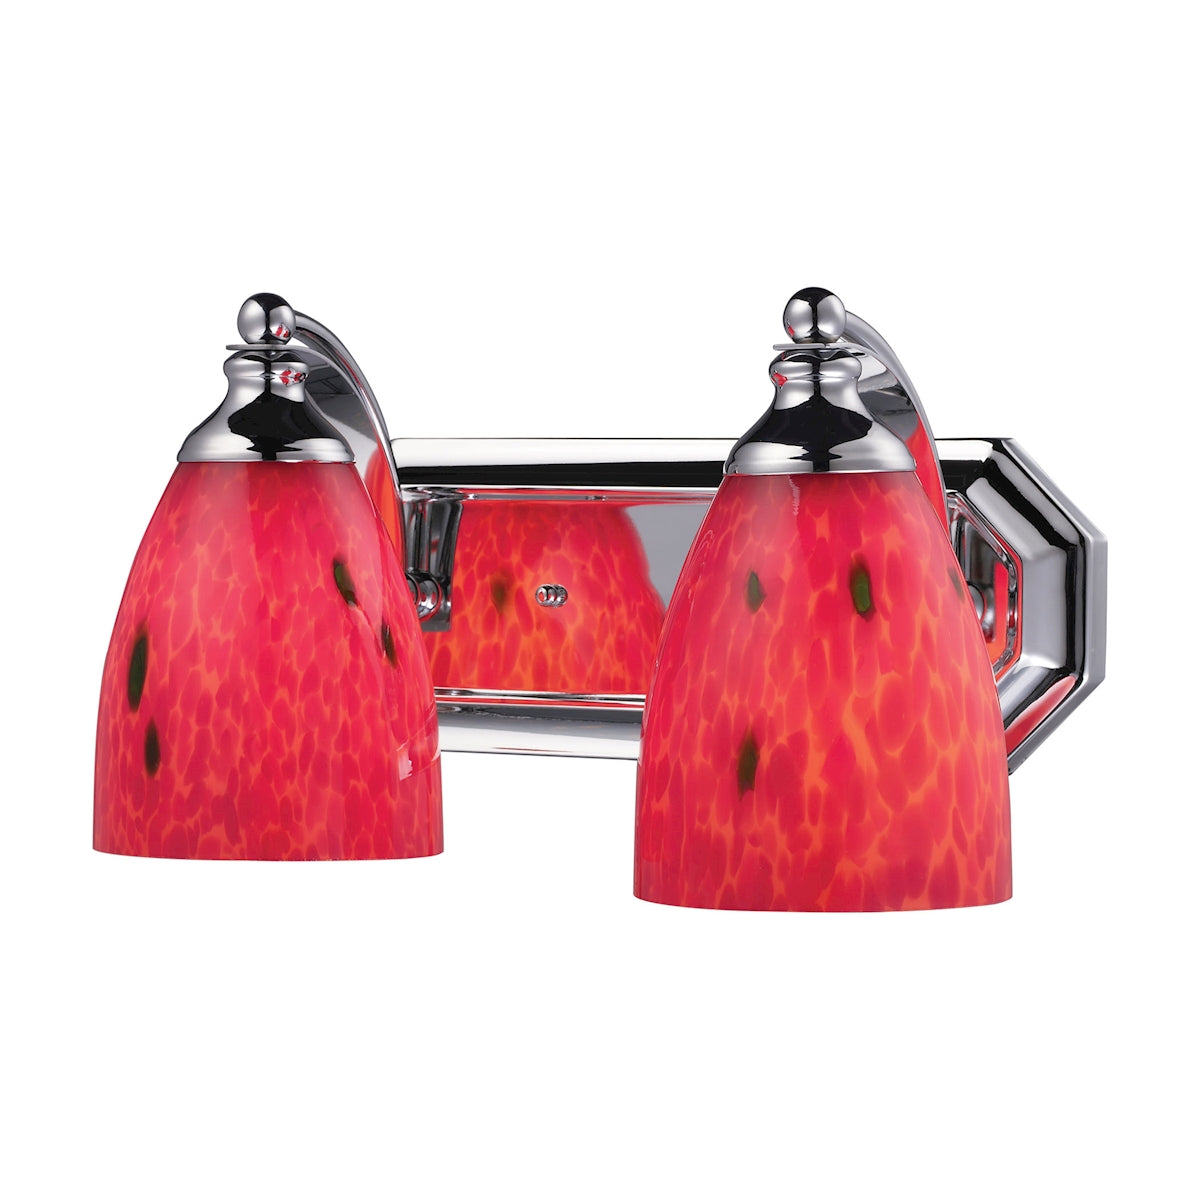 ELK Lighting 570-2C-FR Mix and Match Vanity 2-Light Wall Lamp in Chrome with Fire Red Glass